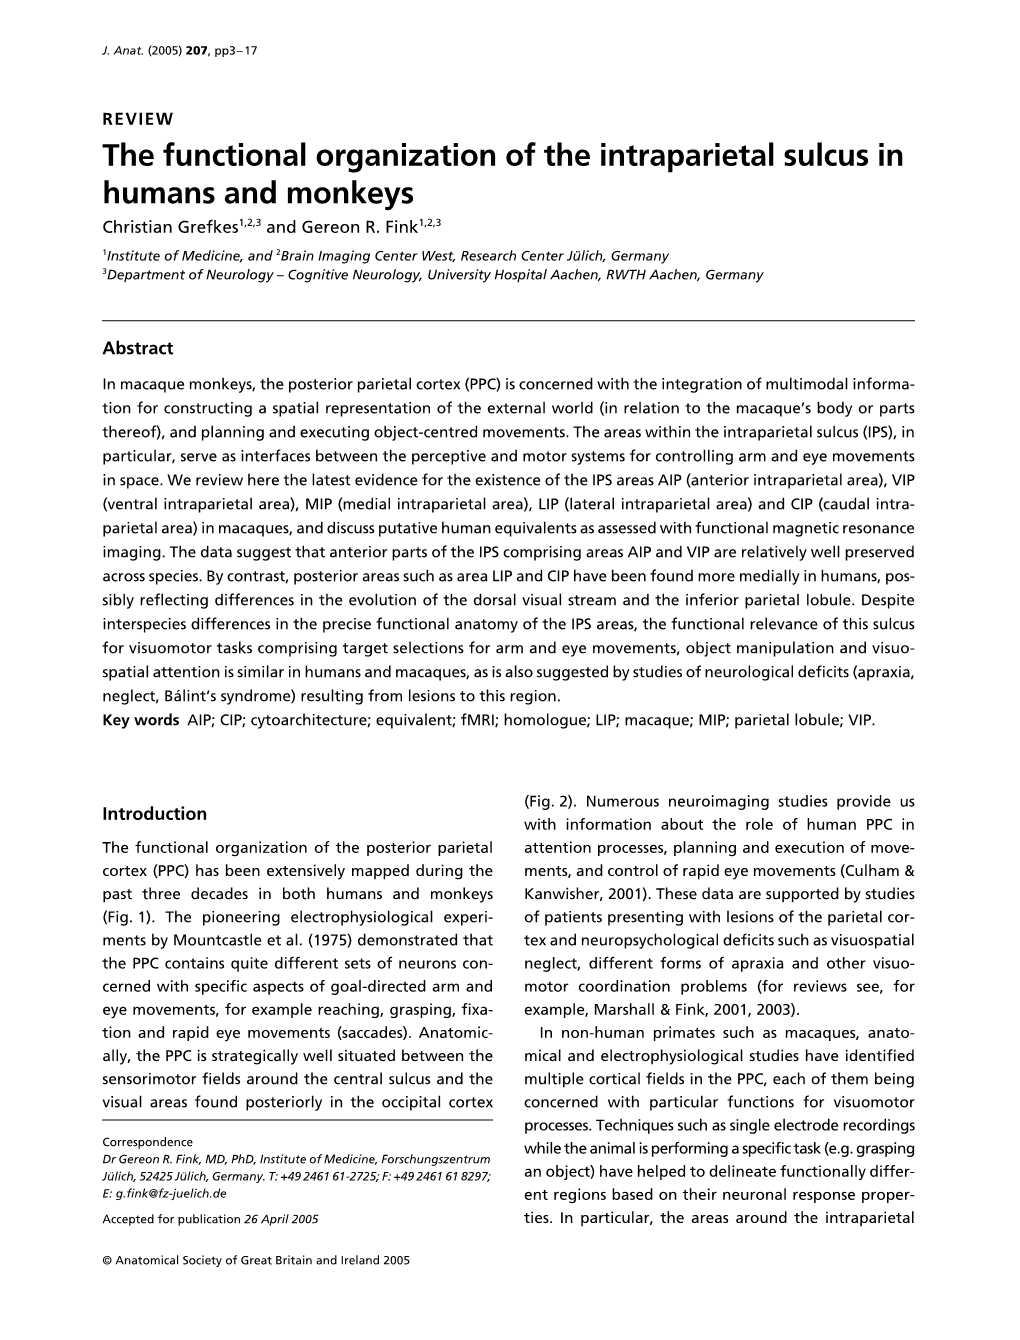 The Functional Organization of the Intraparietal Sulcus in Humans and Monkeys Christian Grefkes1,2,3 and Gereon R